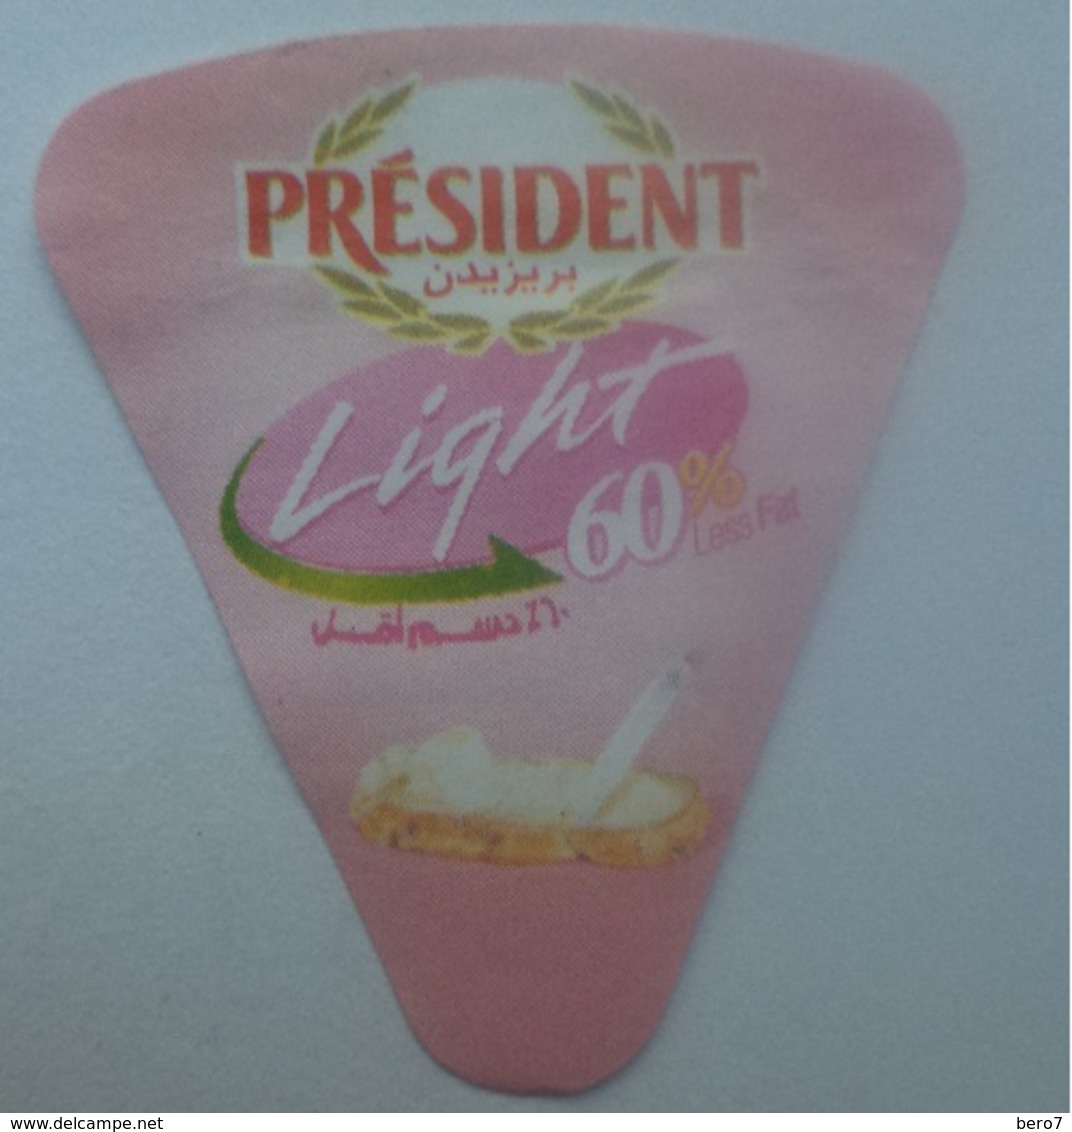 EGYPT - PRESIDENT LIGHT -  Cheese Label  Etiquette De Fromage - Cheese